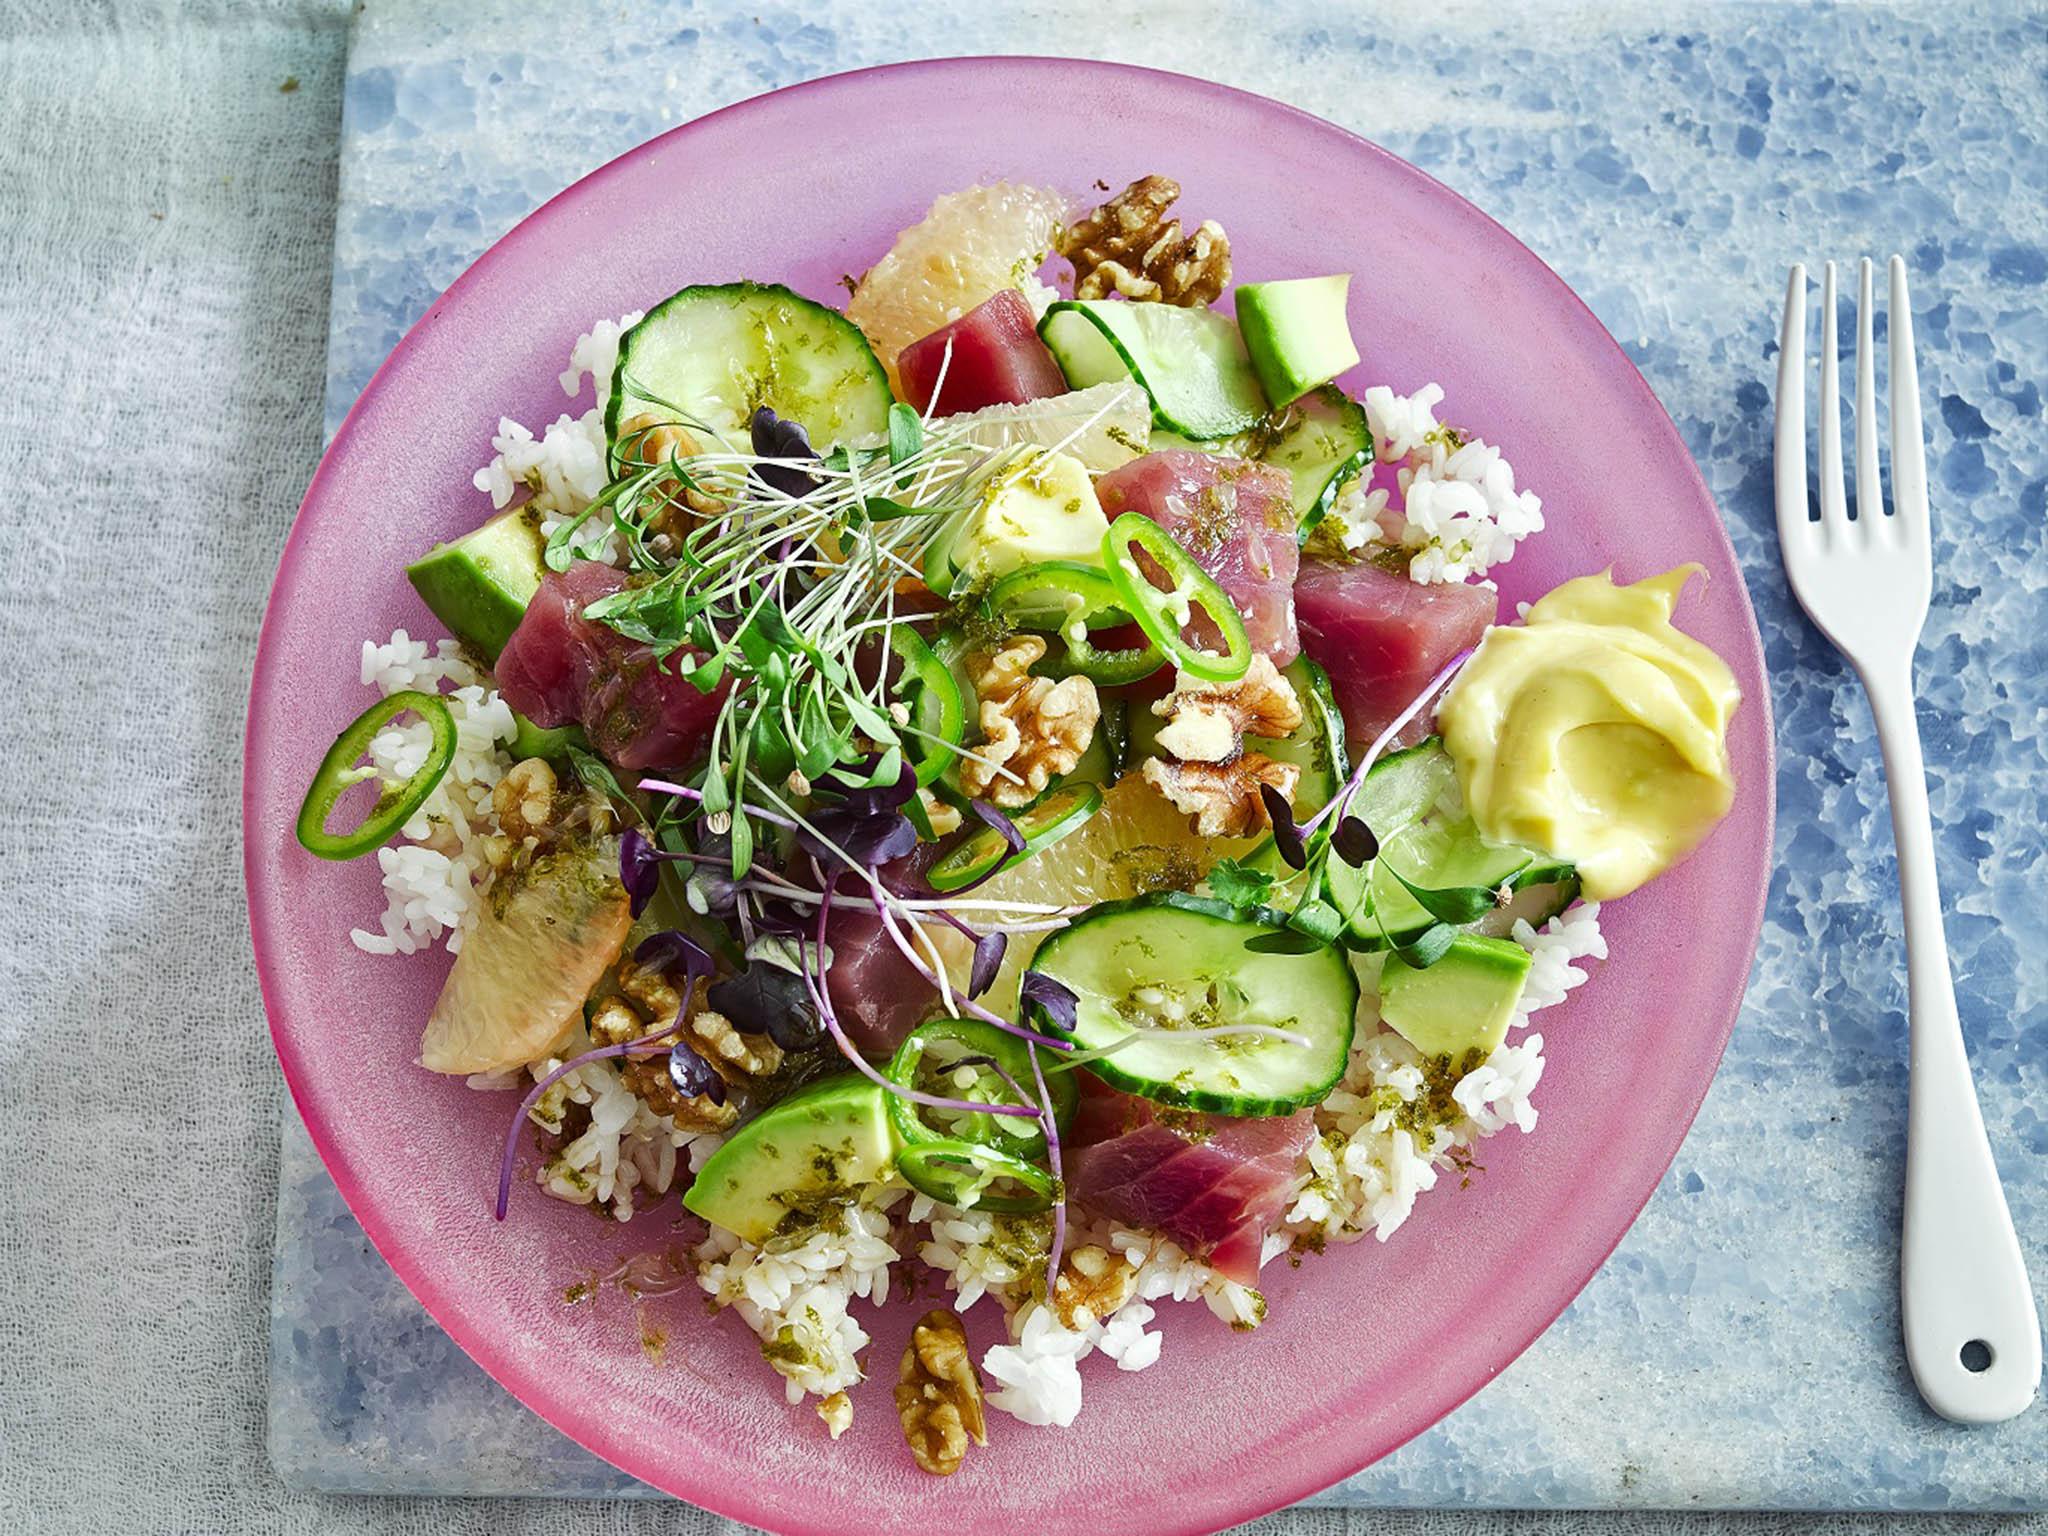 Bring over a bit of Japan, with this colourful healthy staple